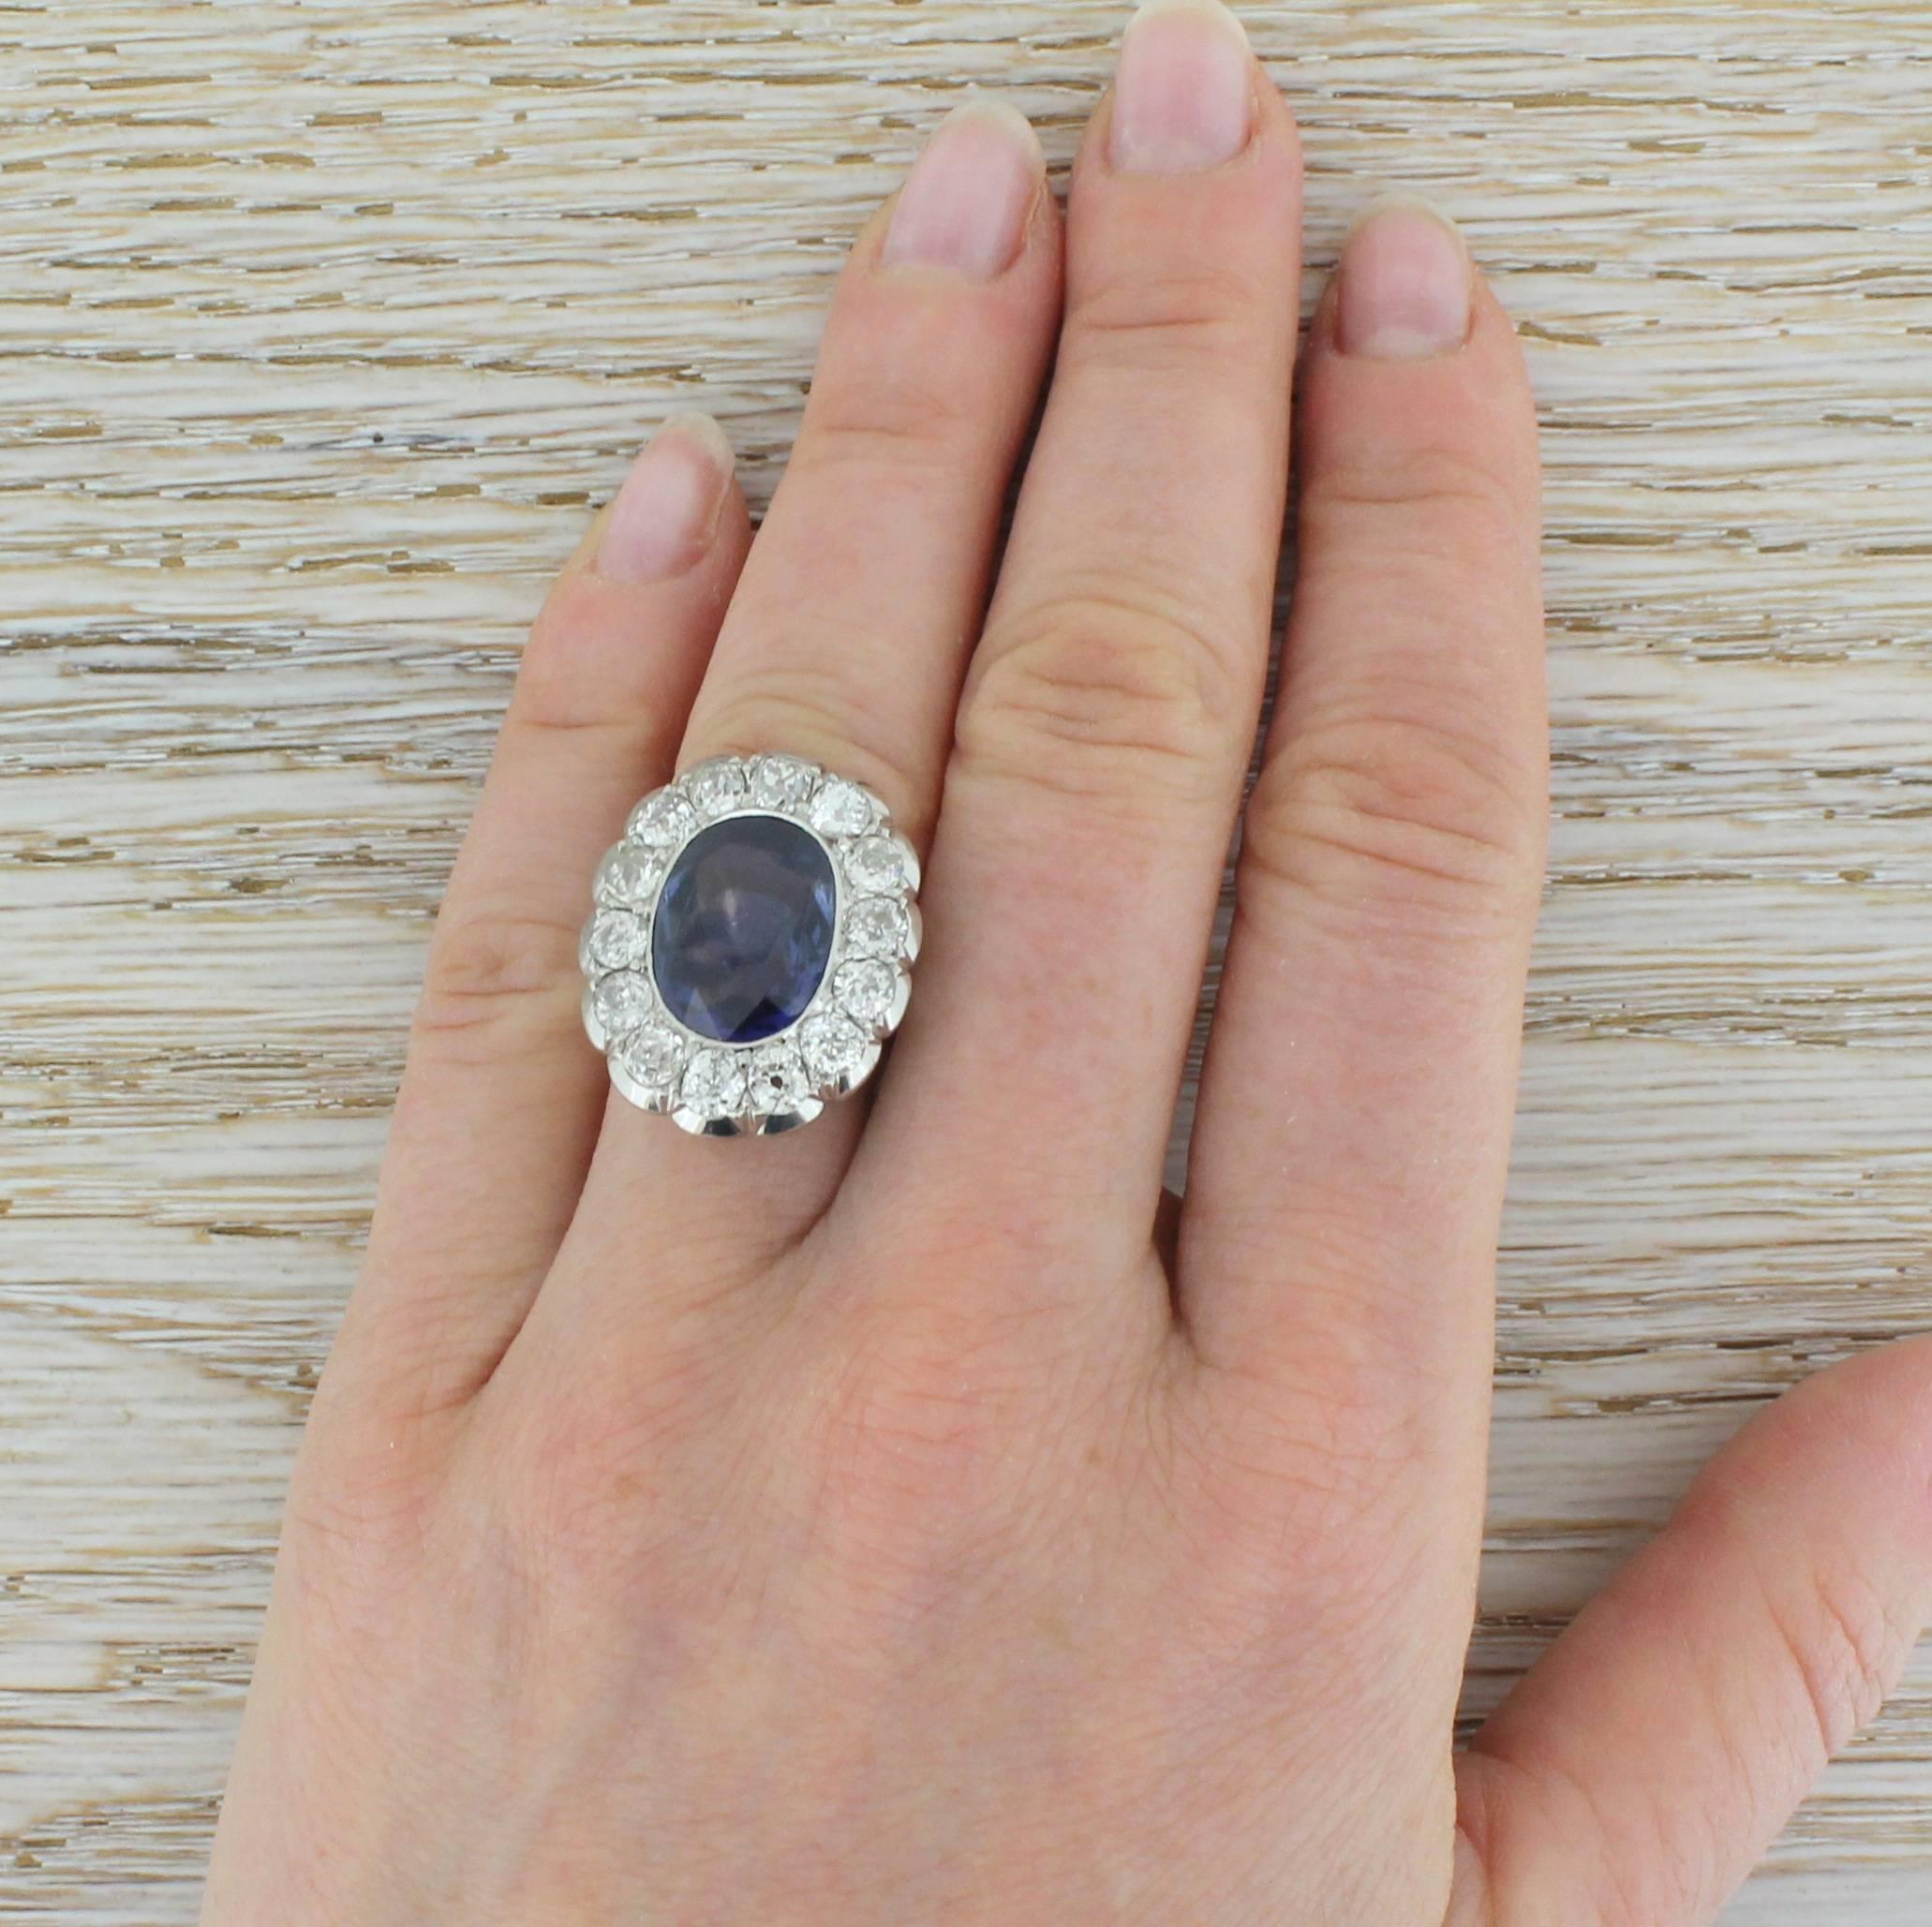 Women's Mid-Century 6.50 Carat Natural Ceylon Sapphire and Old Cut Diamond Ring For Sale